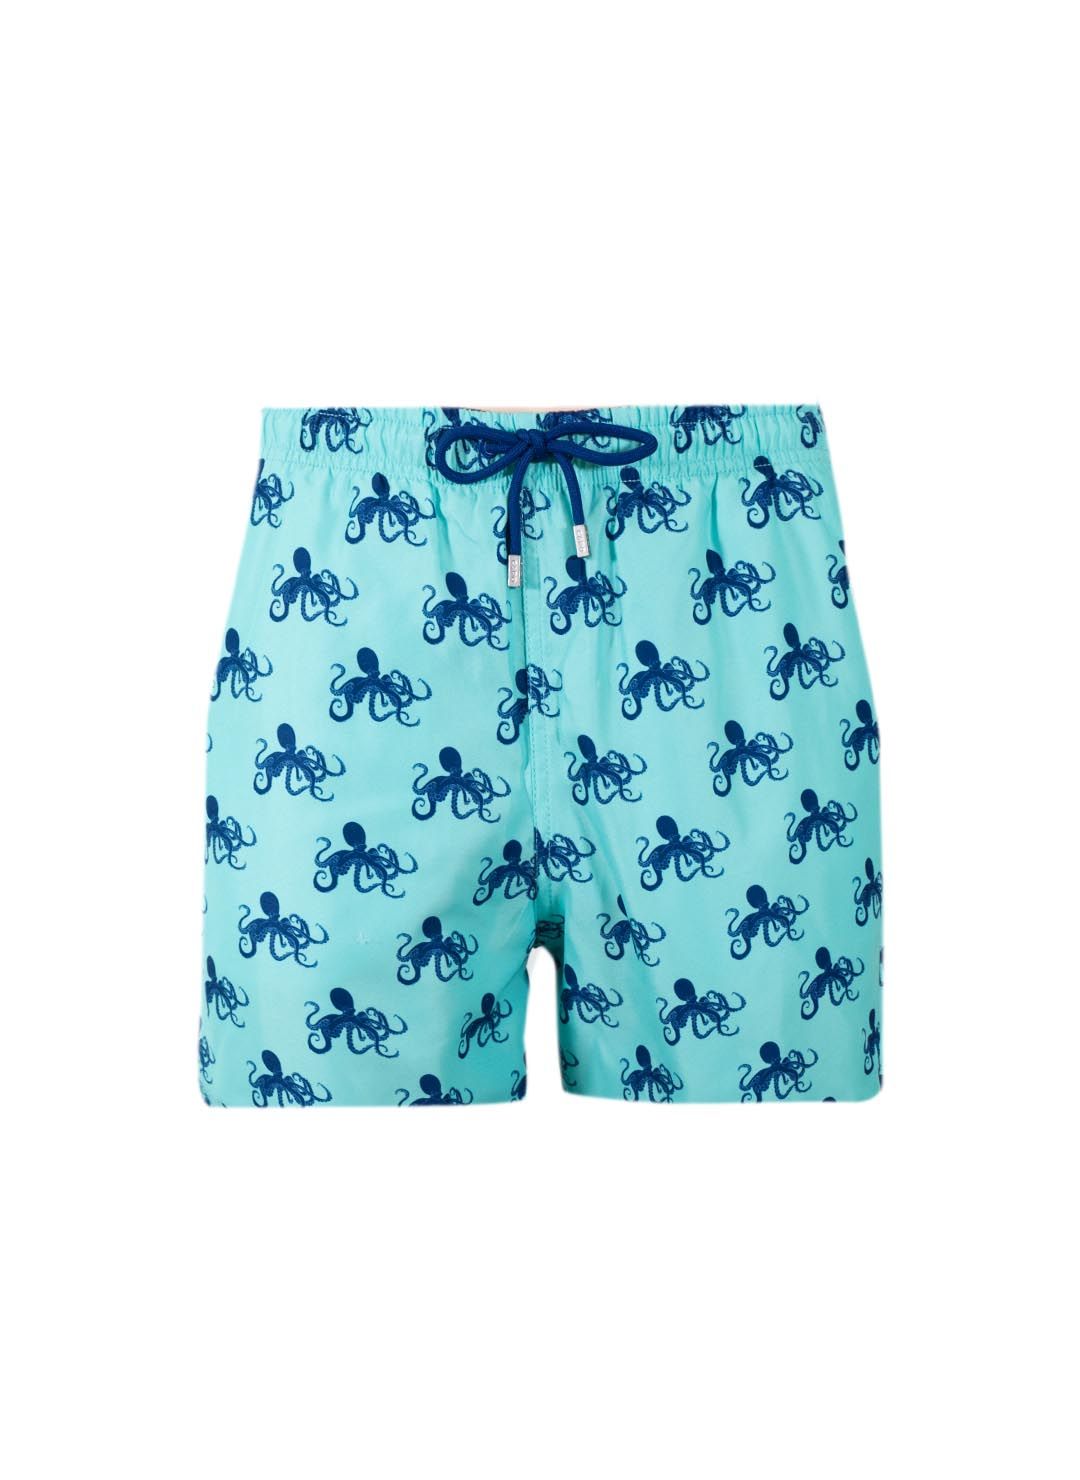 The Az are essential CAHA CAPO boardshorts in Octopus Turquoise. Part of the CAHA CAPO men's swimwear collection.